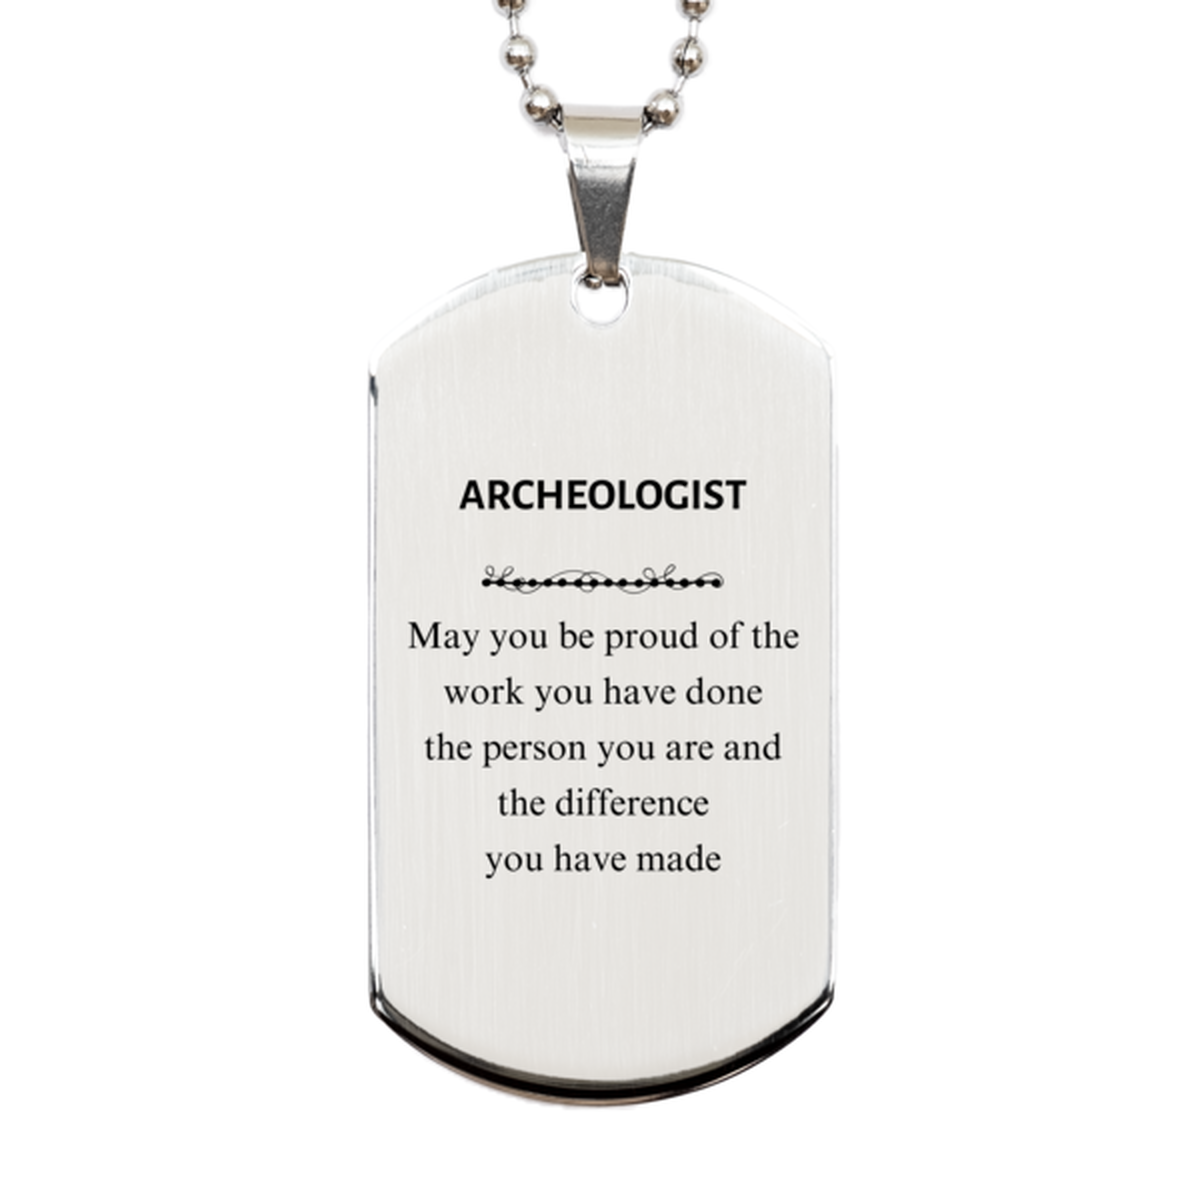 Archeologist May you be proud of the work you have done, Retirement Archeologist Silver Dog Tag for Colleague Appreciation Gifts Amazing for Archeologist